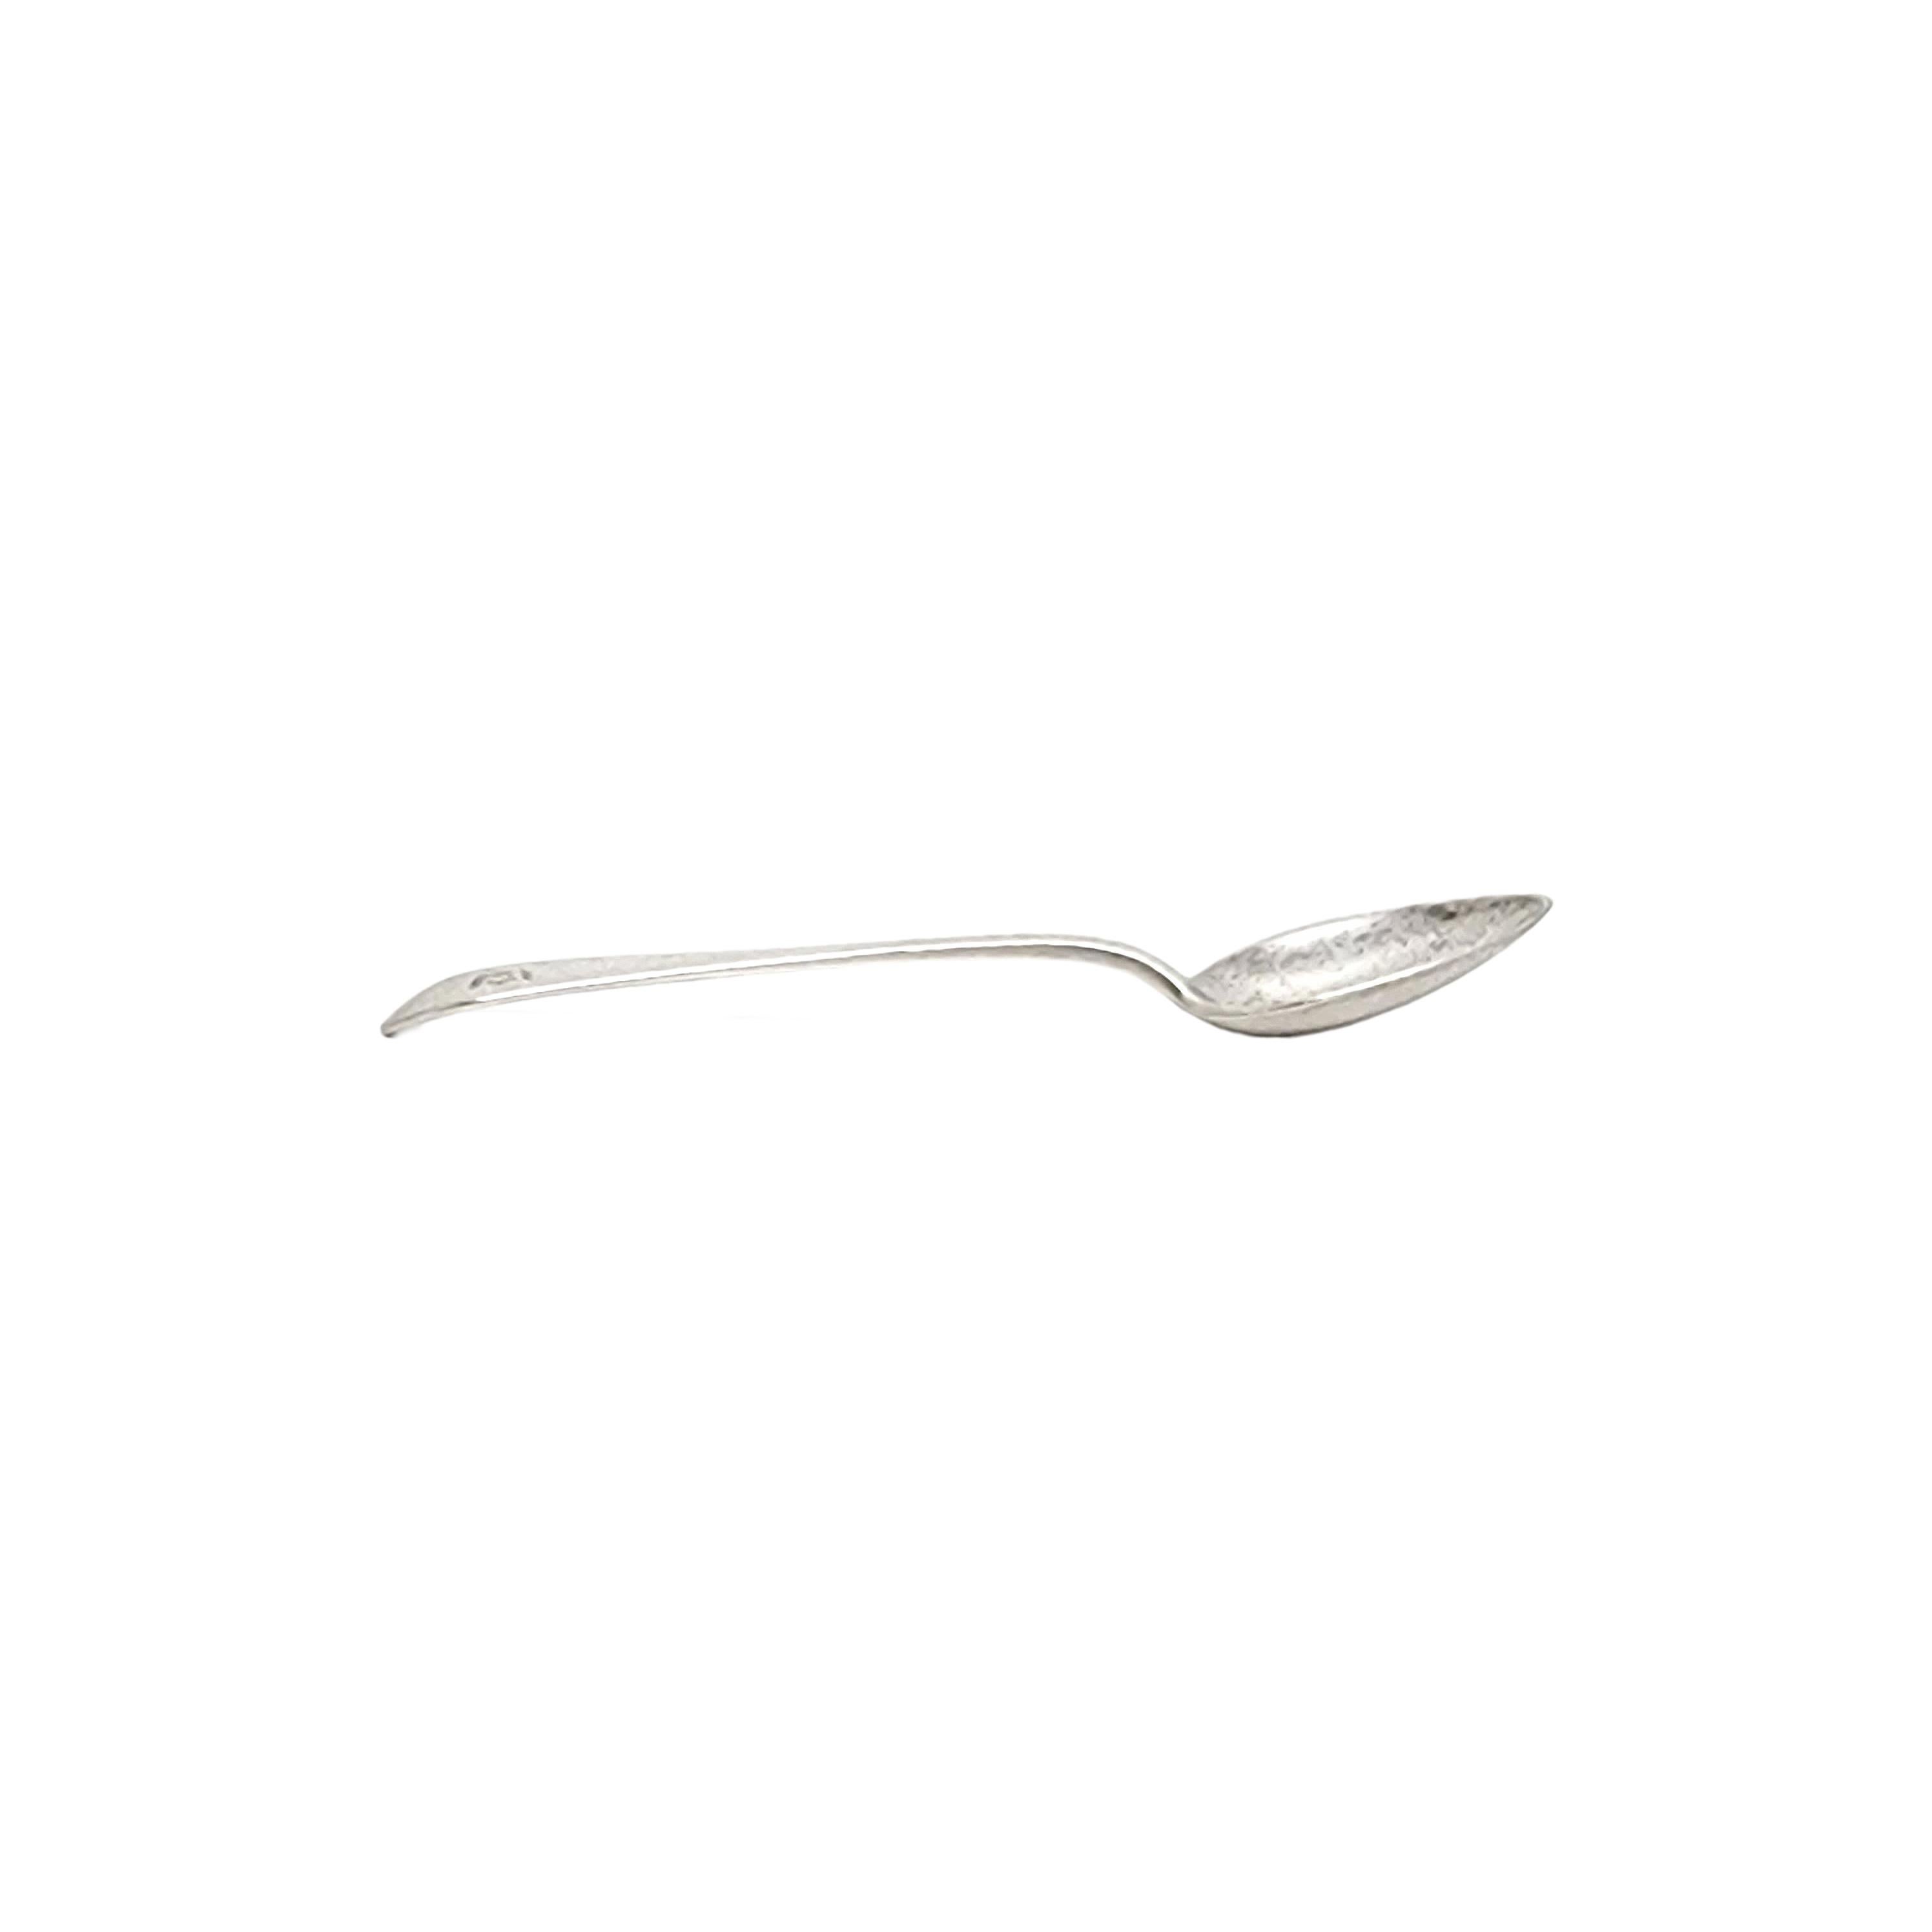 Tiffany & Co Faneuil Sterling Silver Demitasse Spoon with Monogram #13070 In Good Condition For Sale In Washington Depot, CT